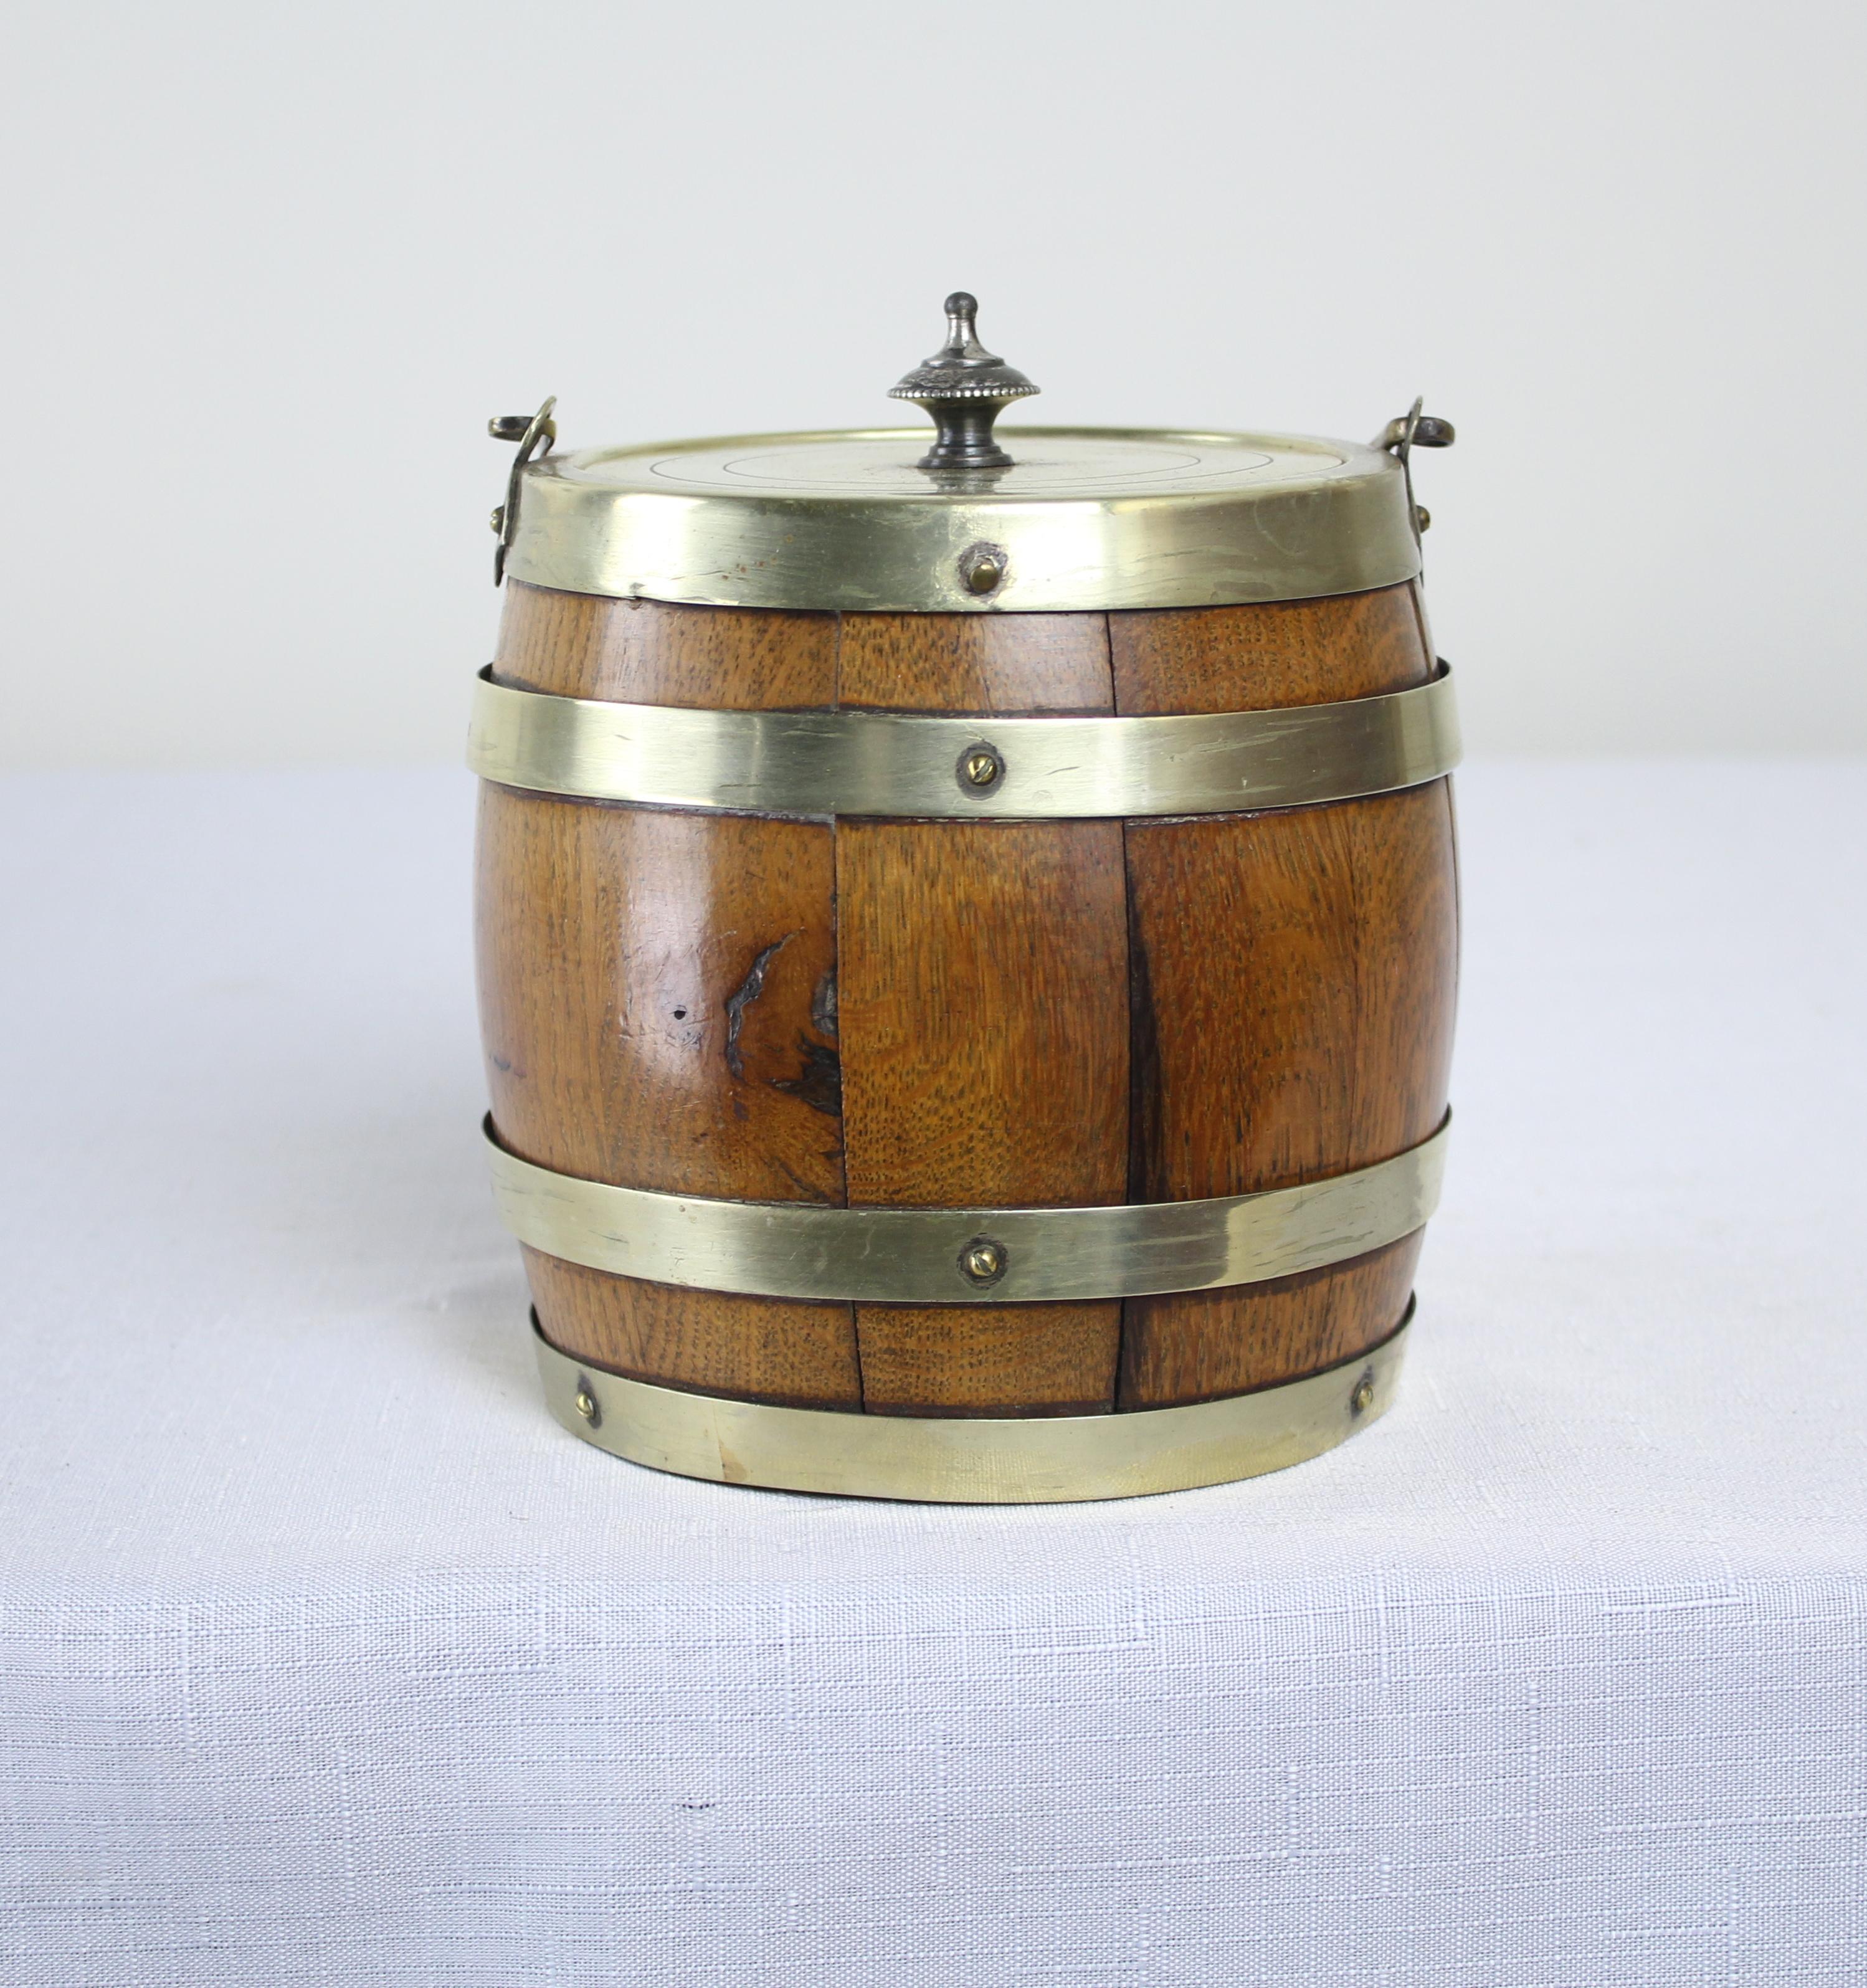 A charming oak biscuit barrel from the late 19th century. The metal is stamped “EPNS”, or Elecro Plated Nickel Silver, a metal alloy that is then silver plated. Traditional porcelain liner and sweet handle. The metal straps are slightly bent.